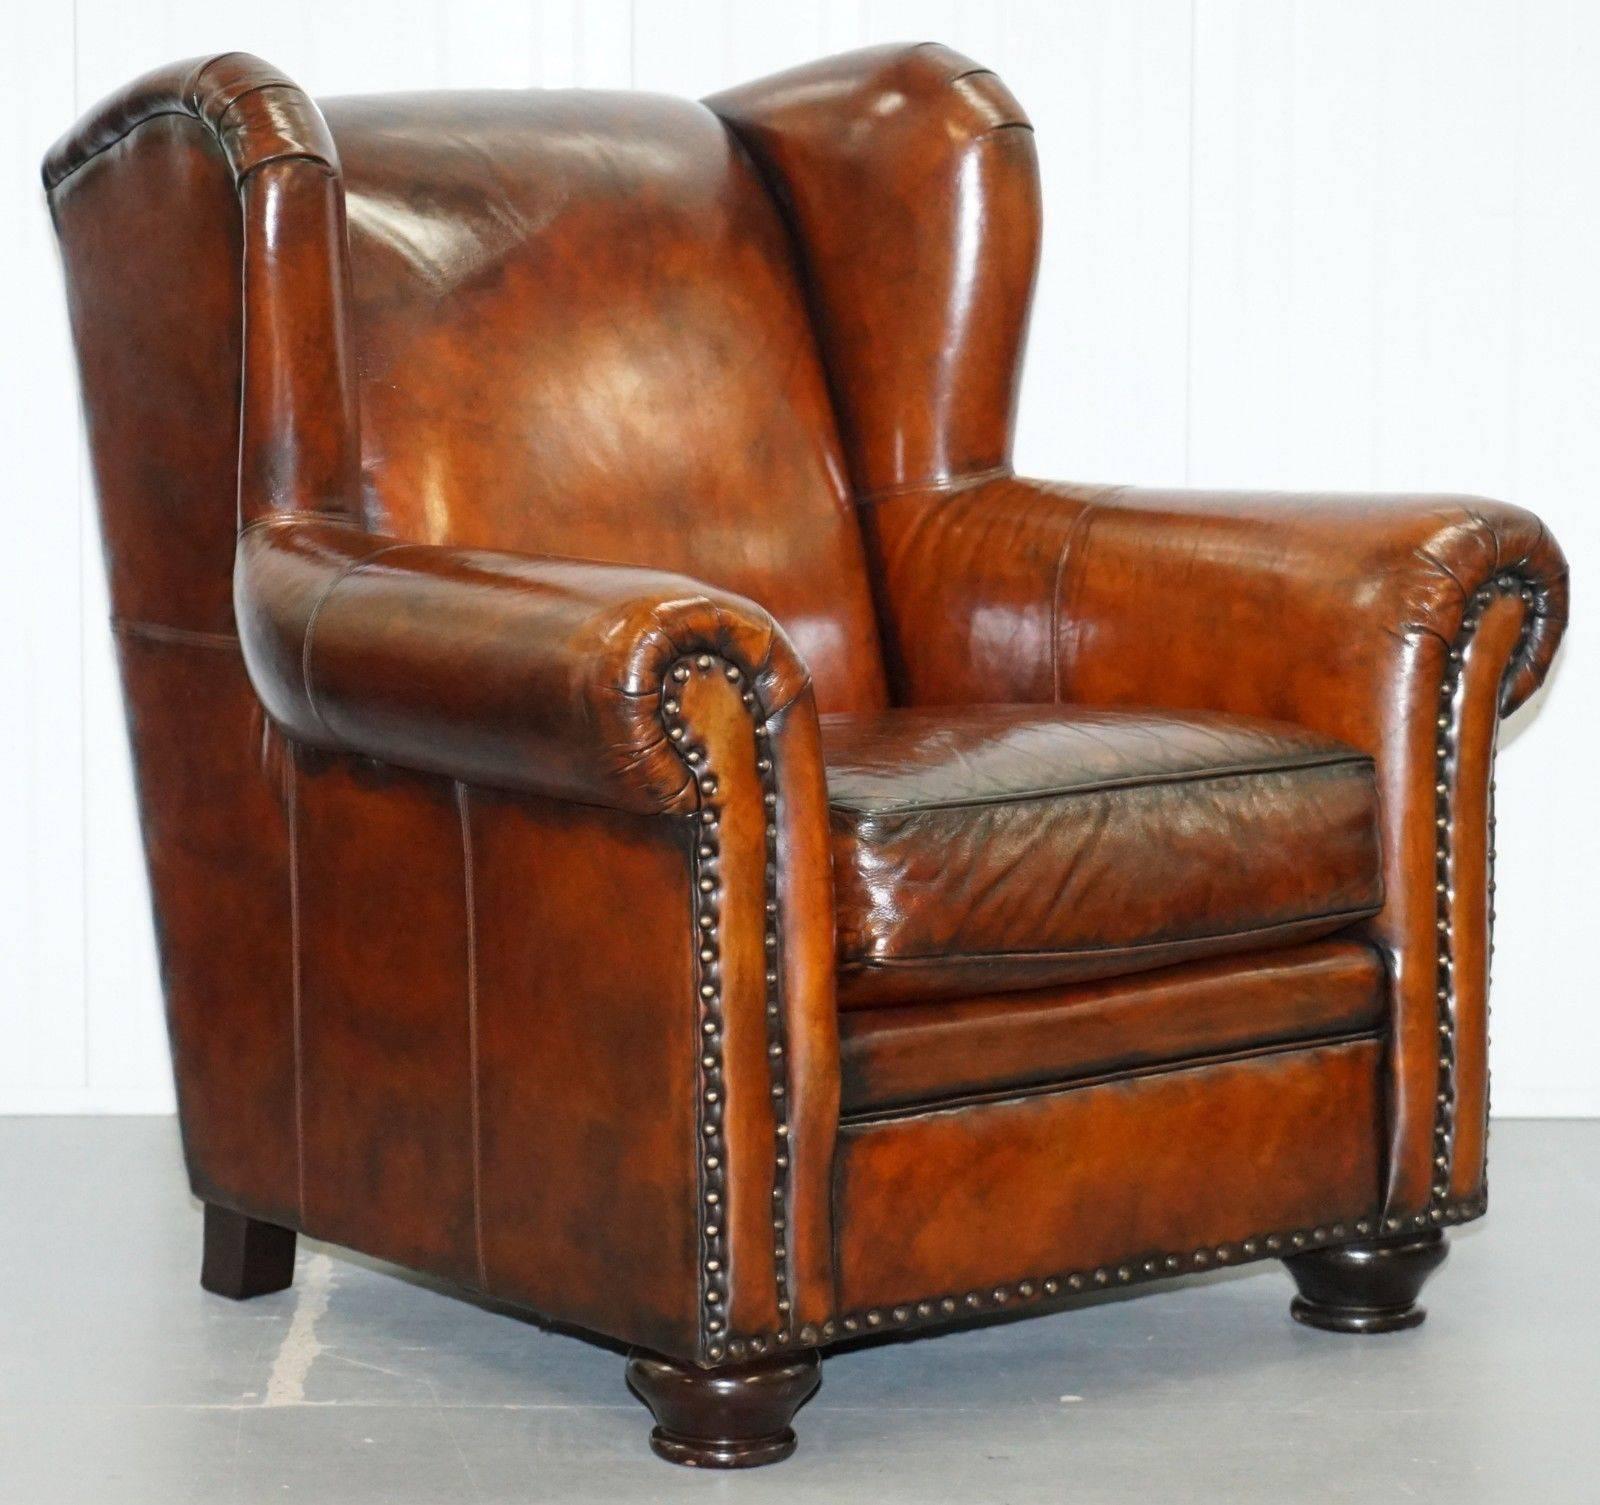 We are delighted to offer for sale this lovely fully restored Bernhardt thick leather armchair and matching footstool RRP £5500

A lovely looking and well-made pair that have been fully restored to include having the leather lightly stripped back